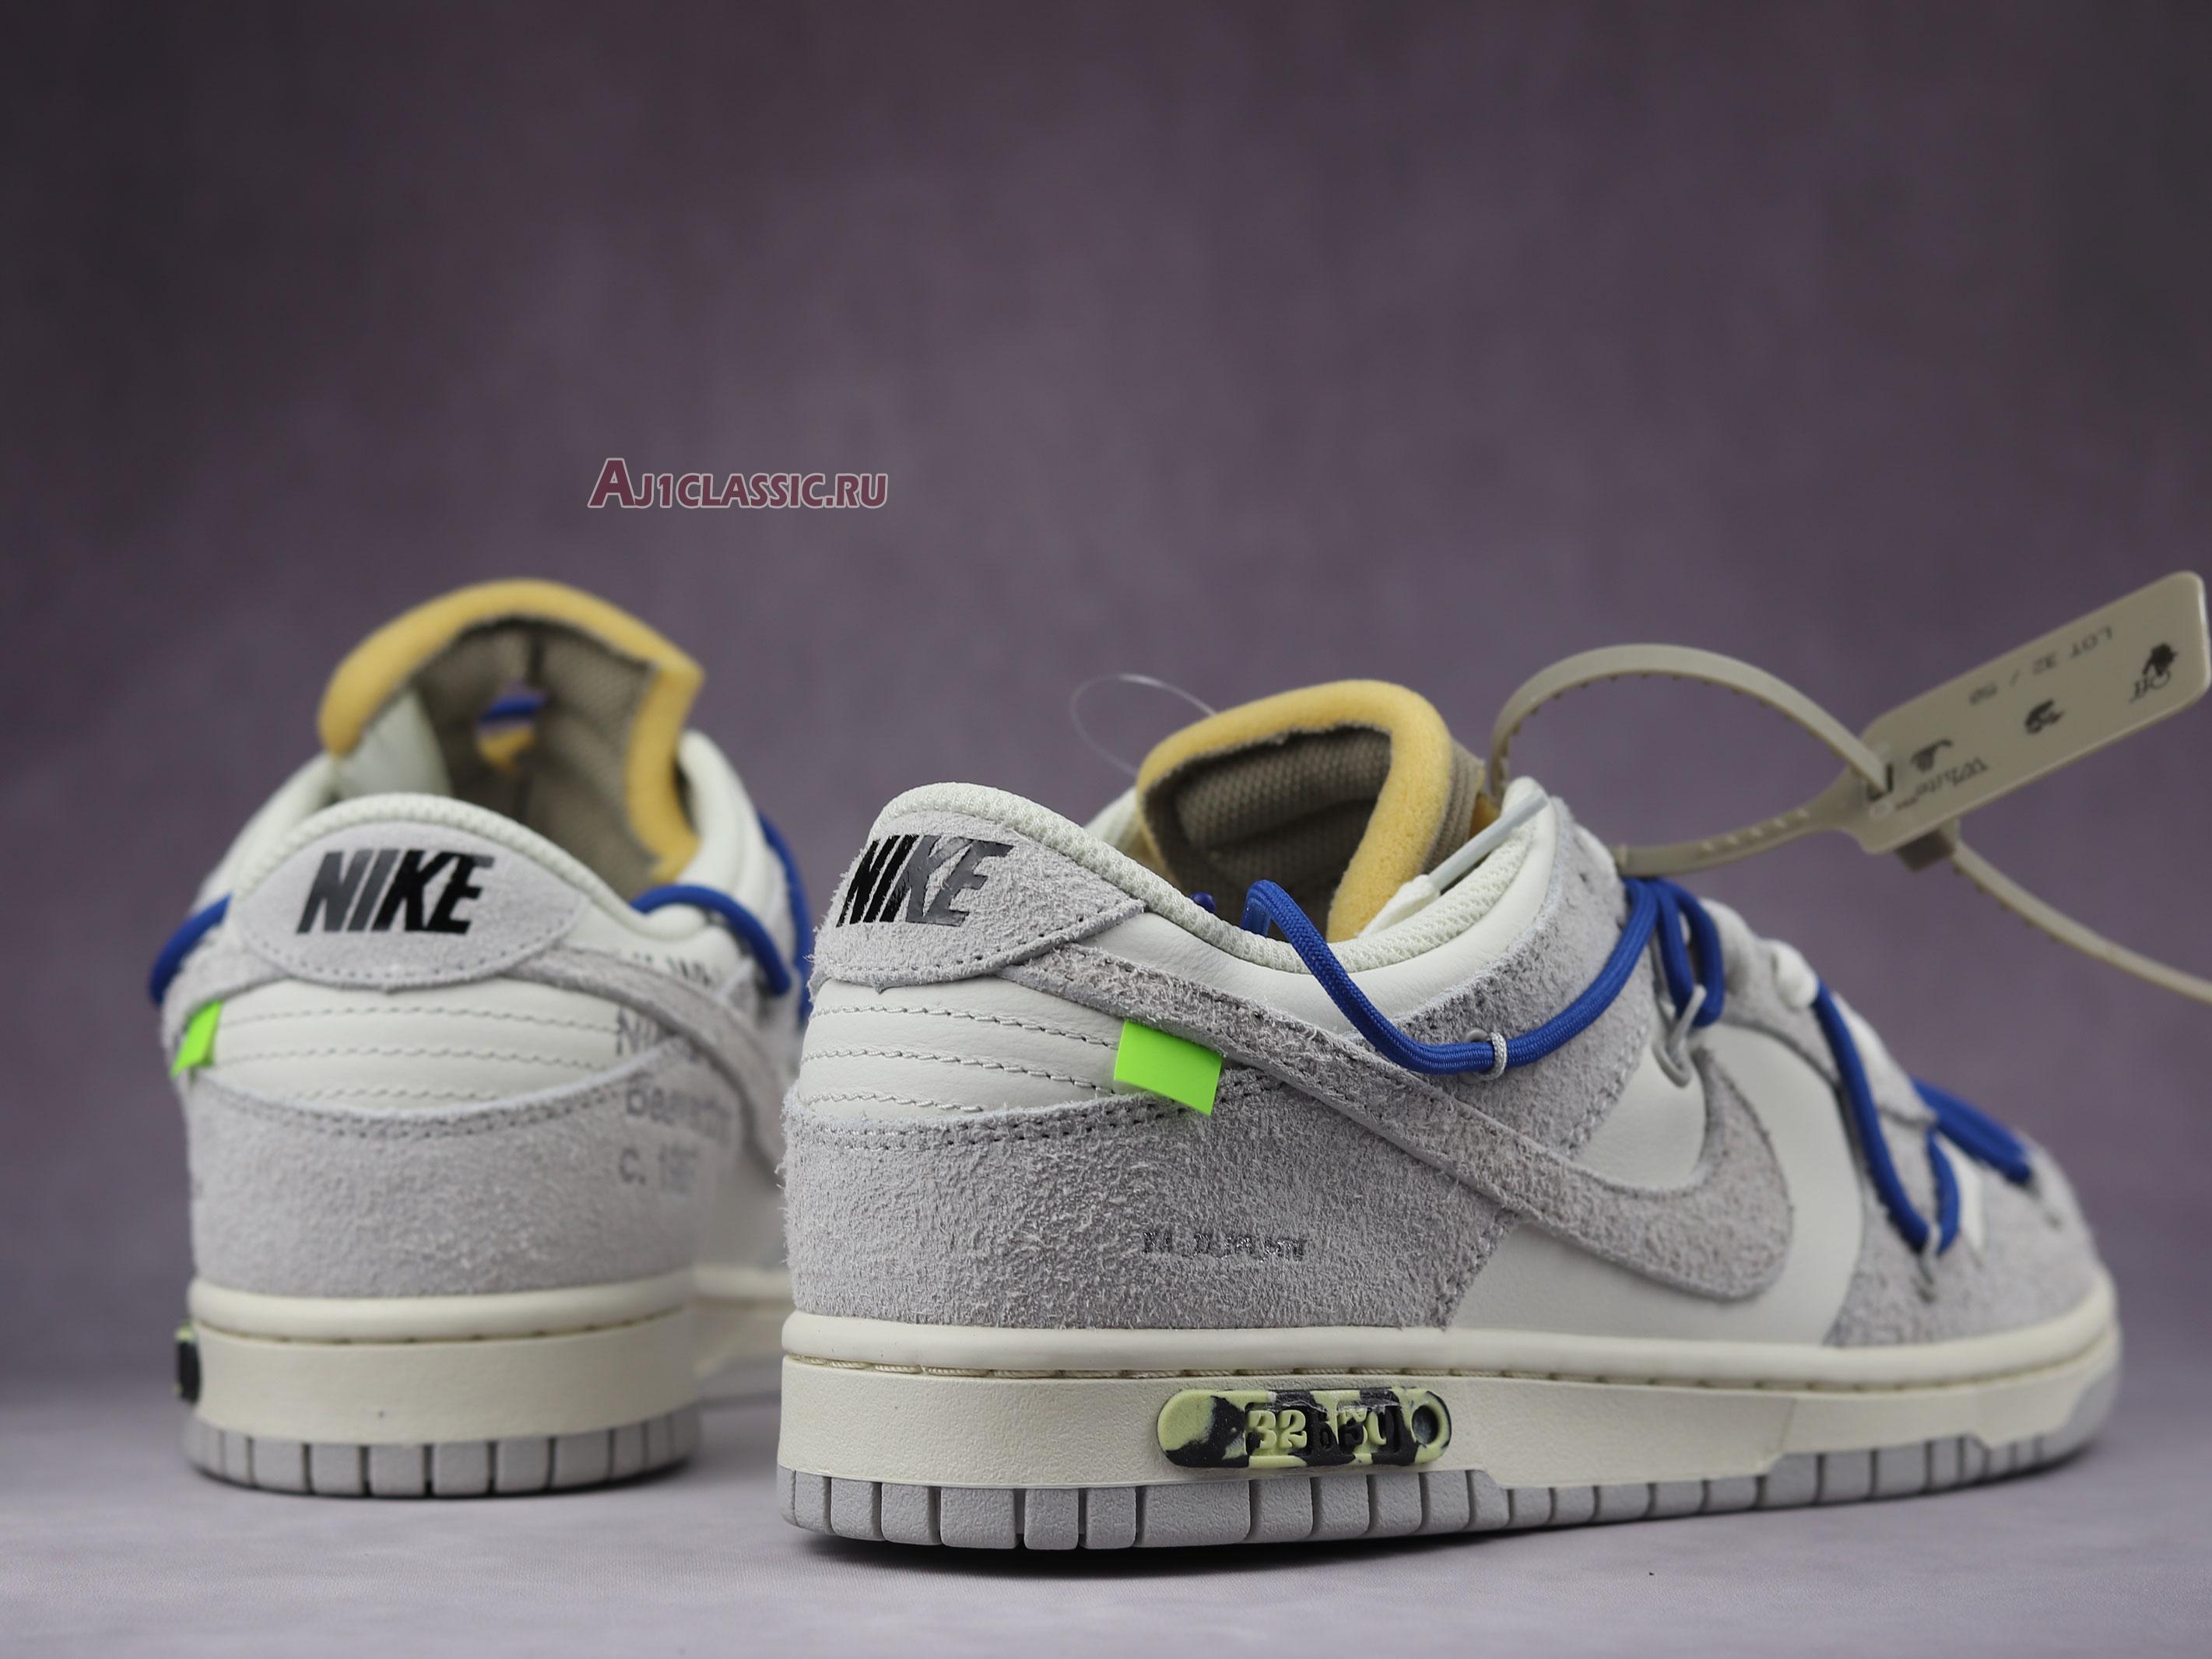 Off-White x Nike Dunk Low "Lot 32 of 50" DJ0950-104